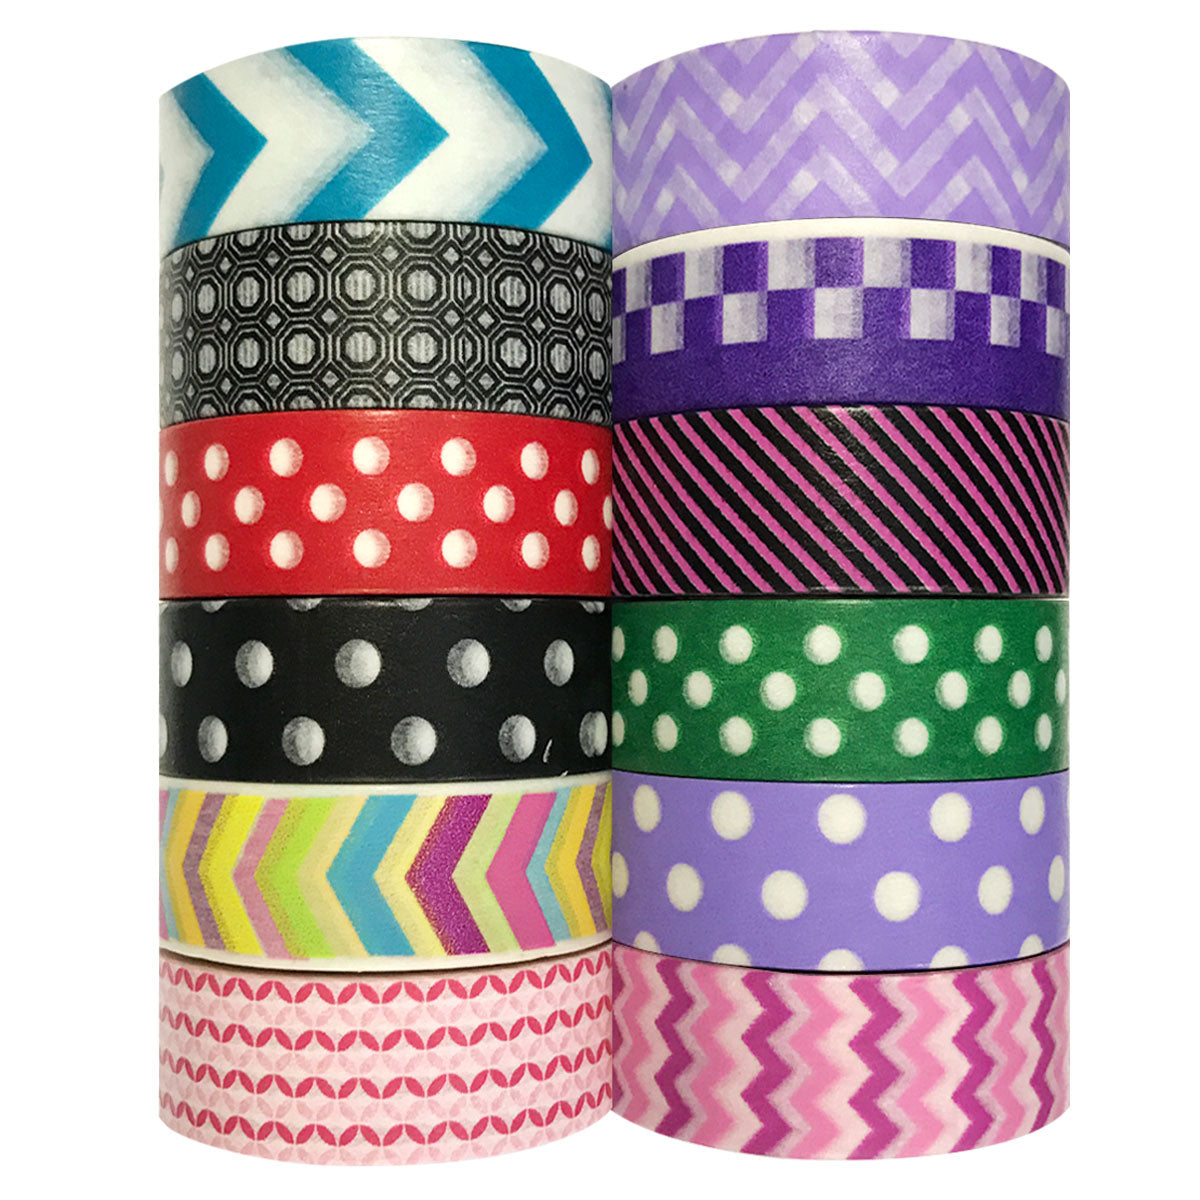 Wrapables Washi Tapes Decorative Masking Tapes, Set of 12, ADSET53, 12  pieces - Jay C Food Stores